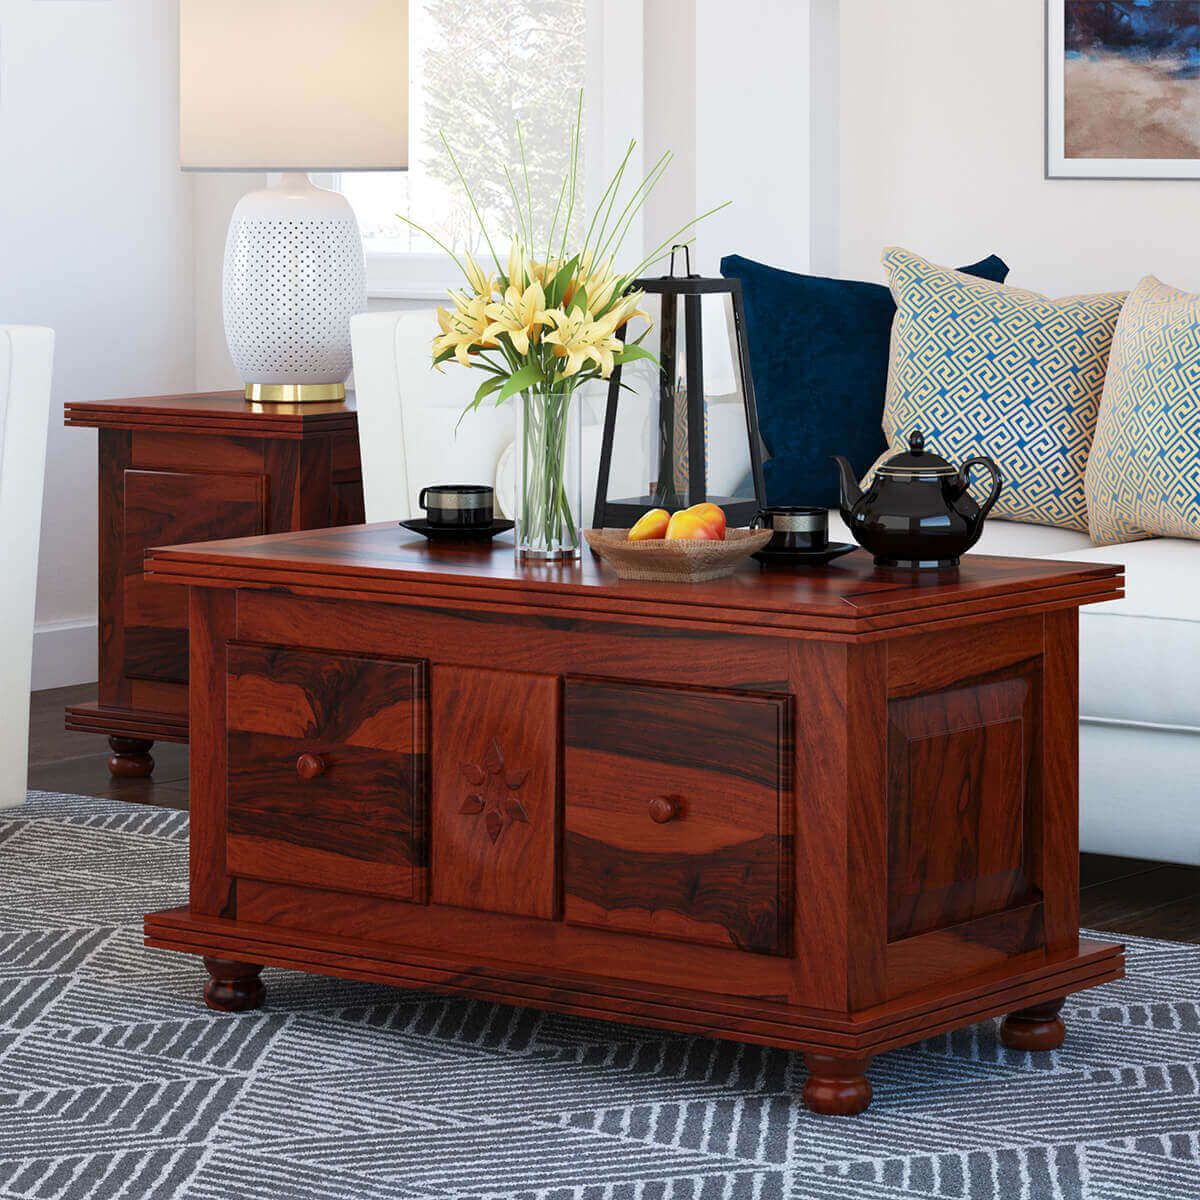 Arca Rustic Solid Wood 2 Drawer Storage Cocktail Coffee Table Throughout 2 Drawer Cocktail Tables (View 3 of 15)